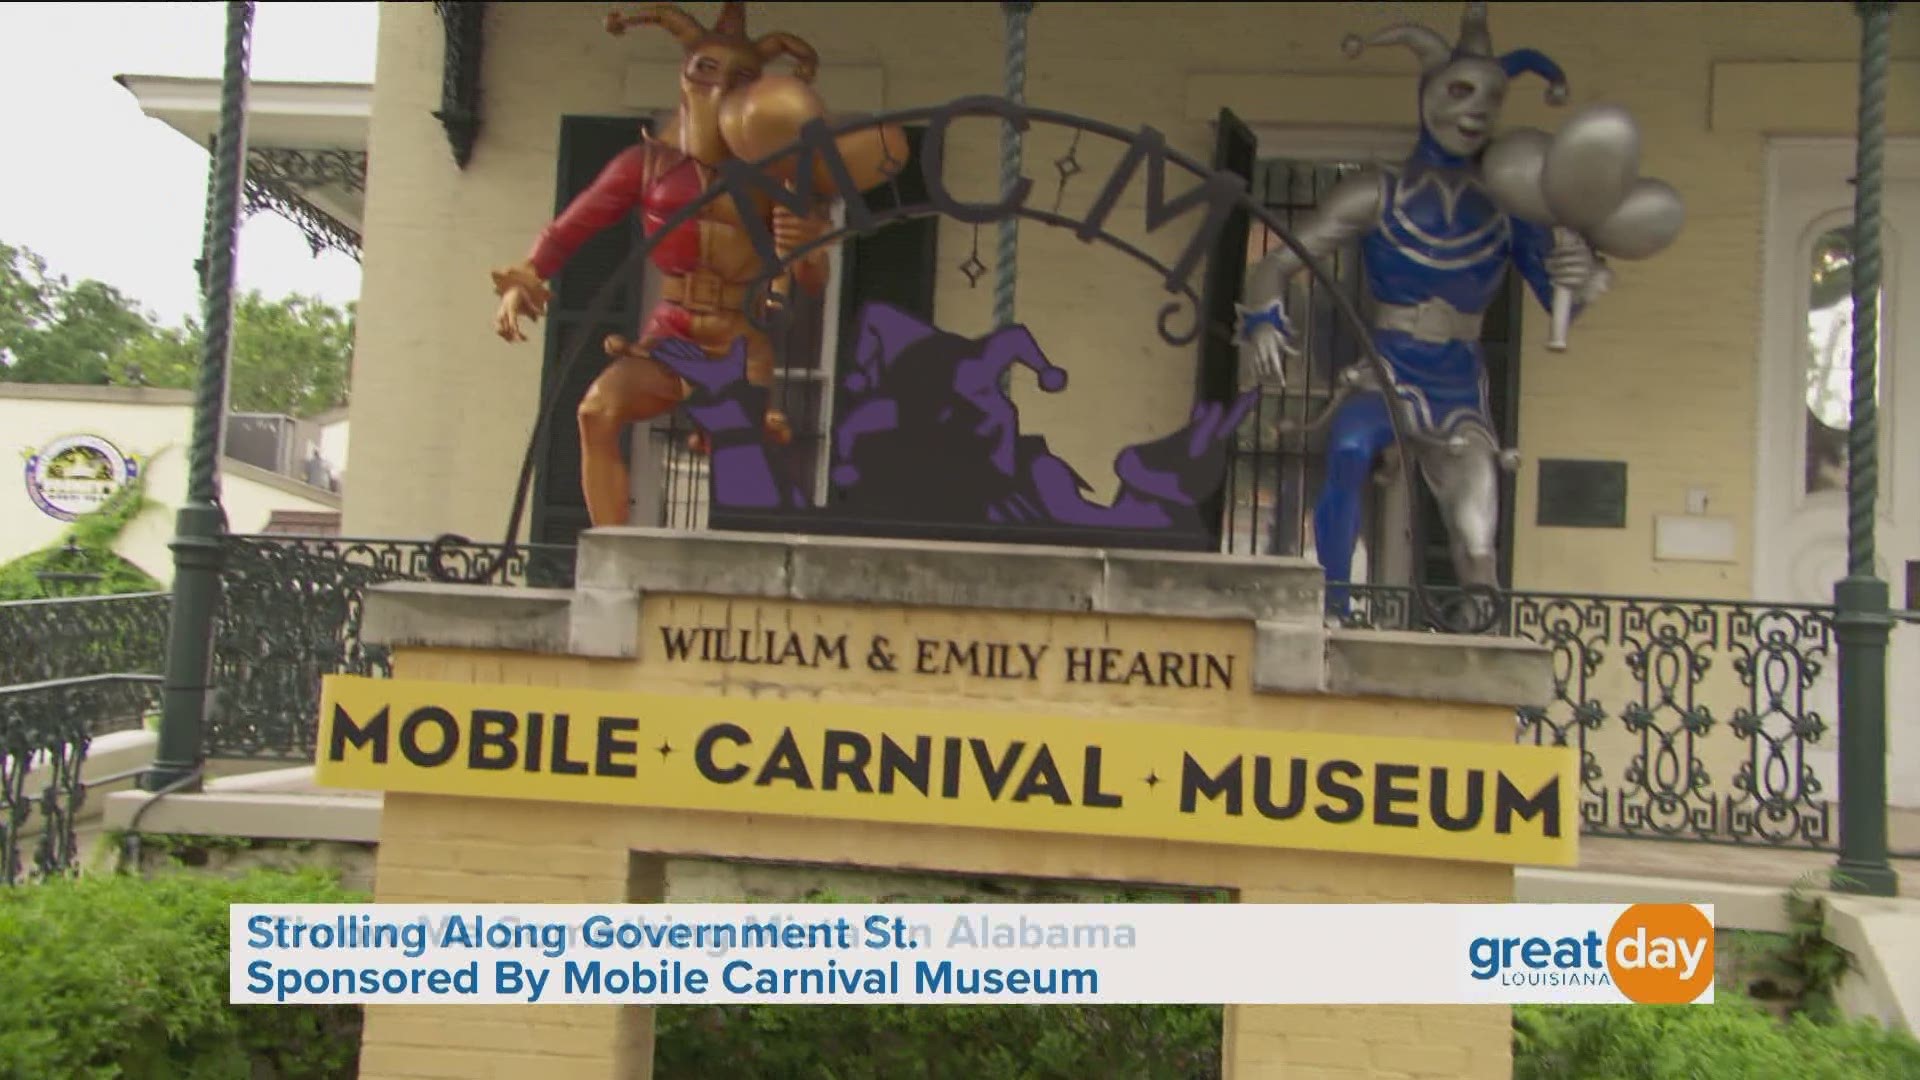 The Mobile Carnival Museum is one-of-a-kind museum highlighting the history of Mardi Gras in Mobile, AL, the birthplace of carnival in America.